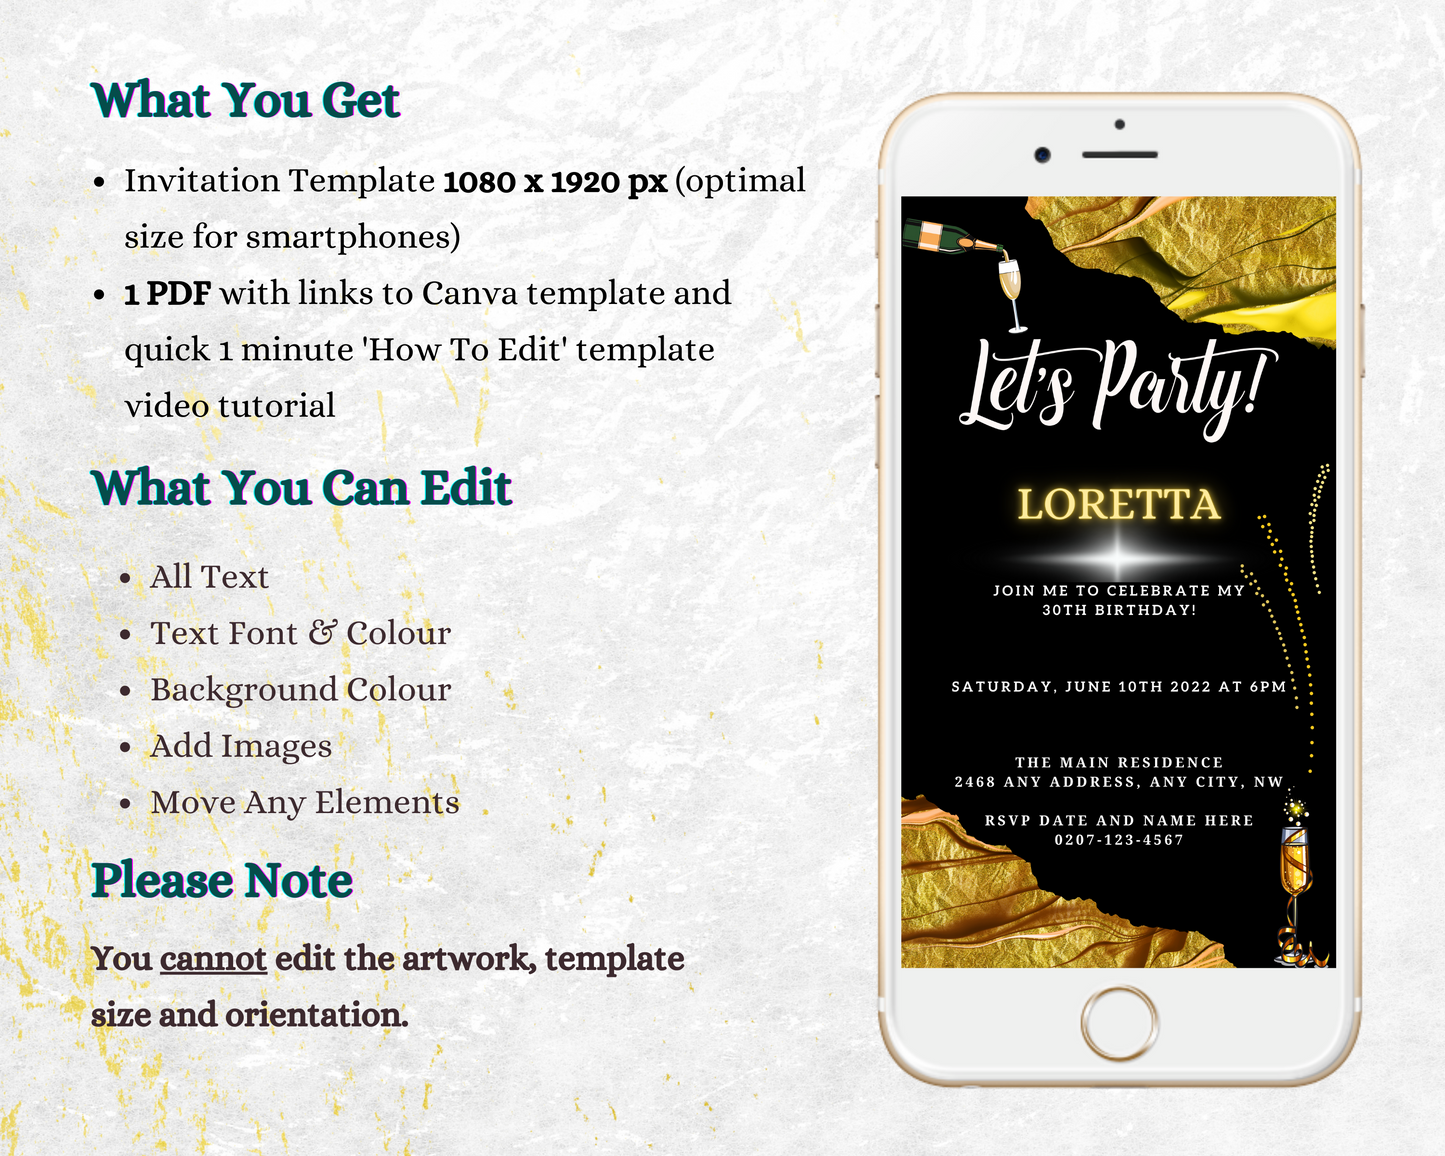 Gold Black Ankara customisable party evite displayed on a smartphone screen alongside editable elements, including text and invitation details, ready for personalization via Canva.